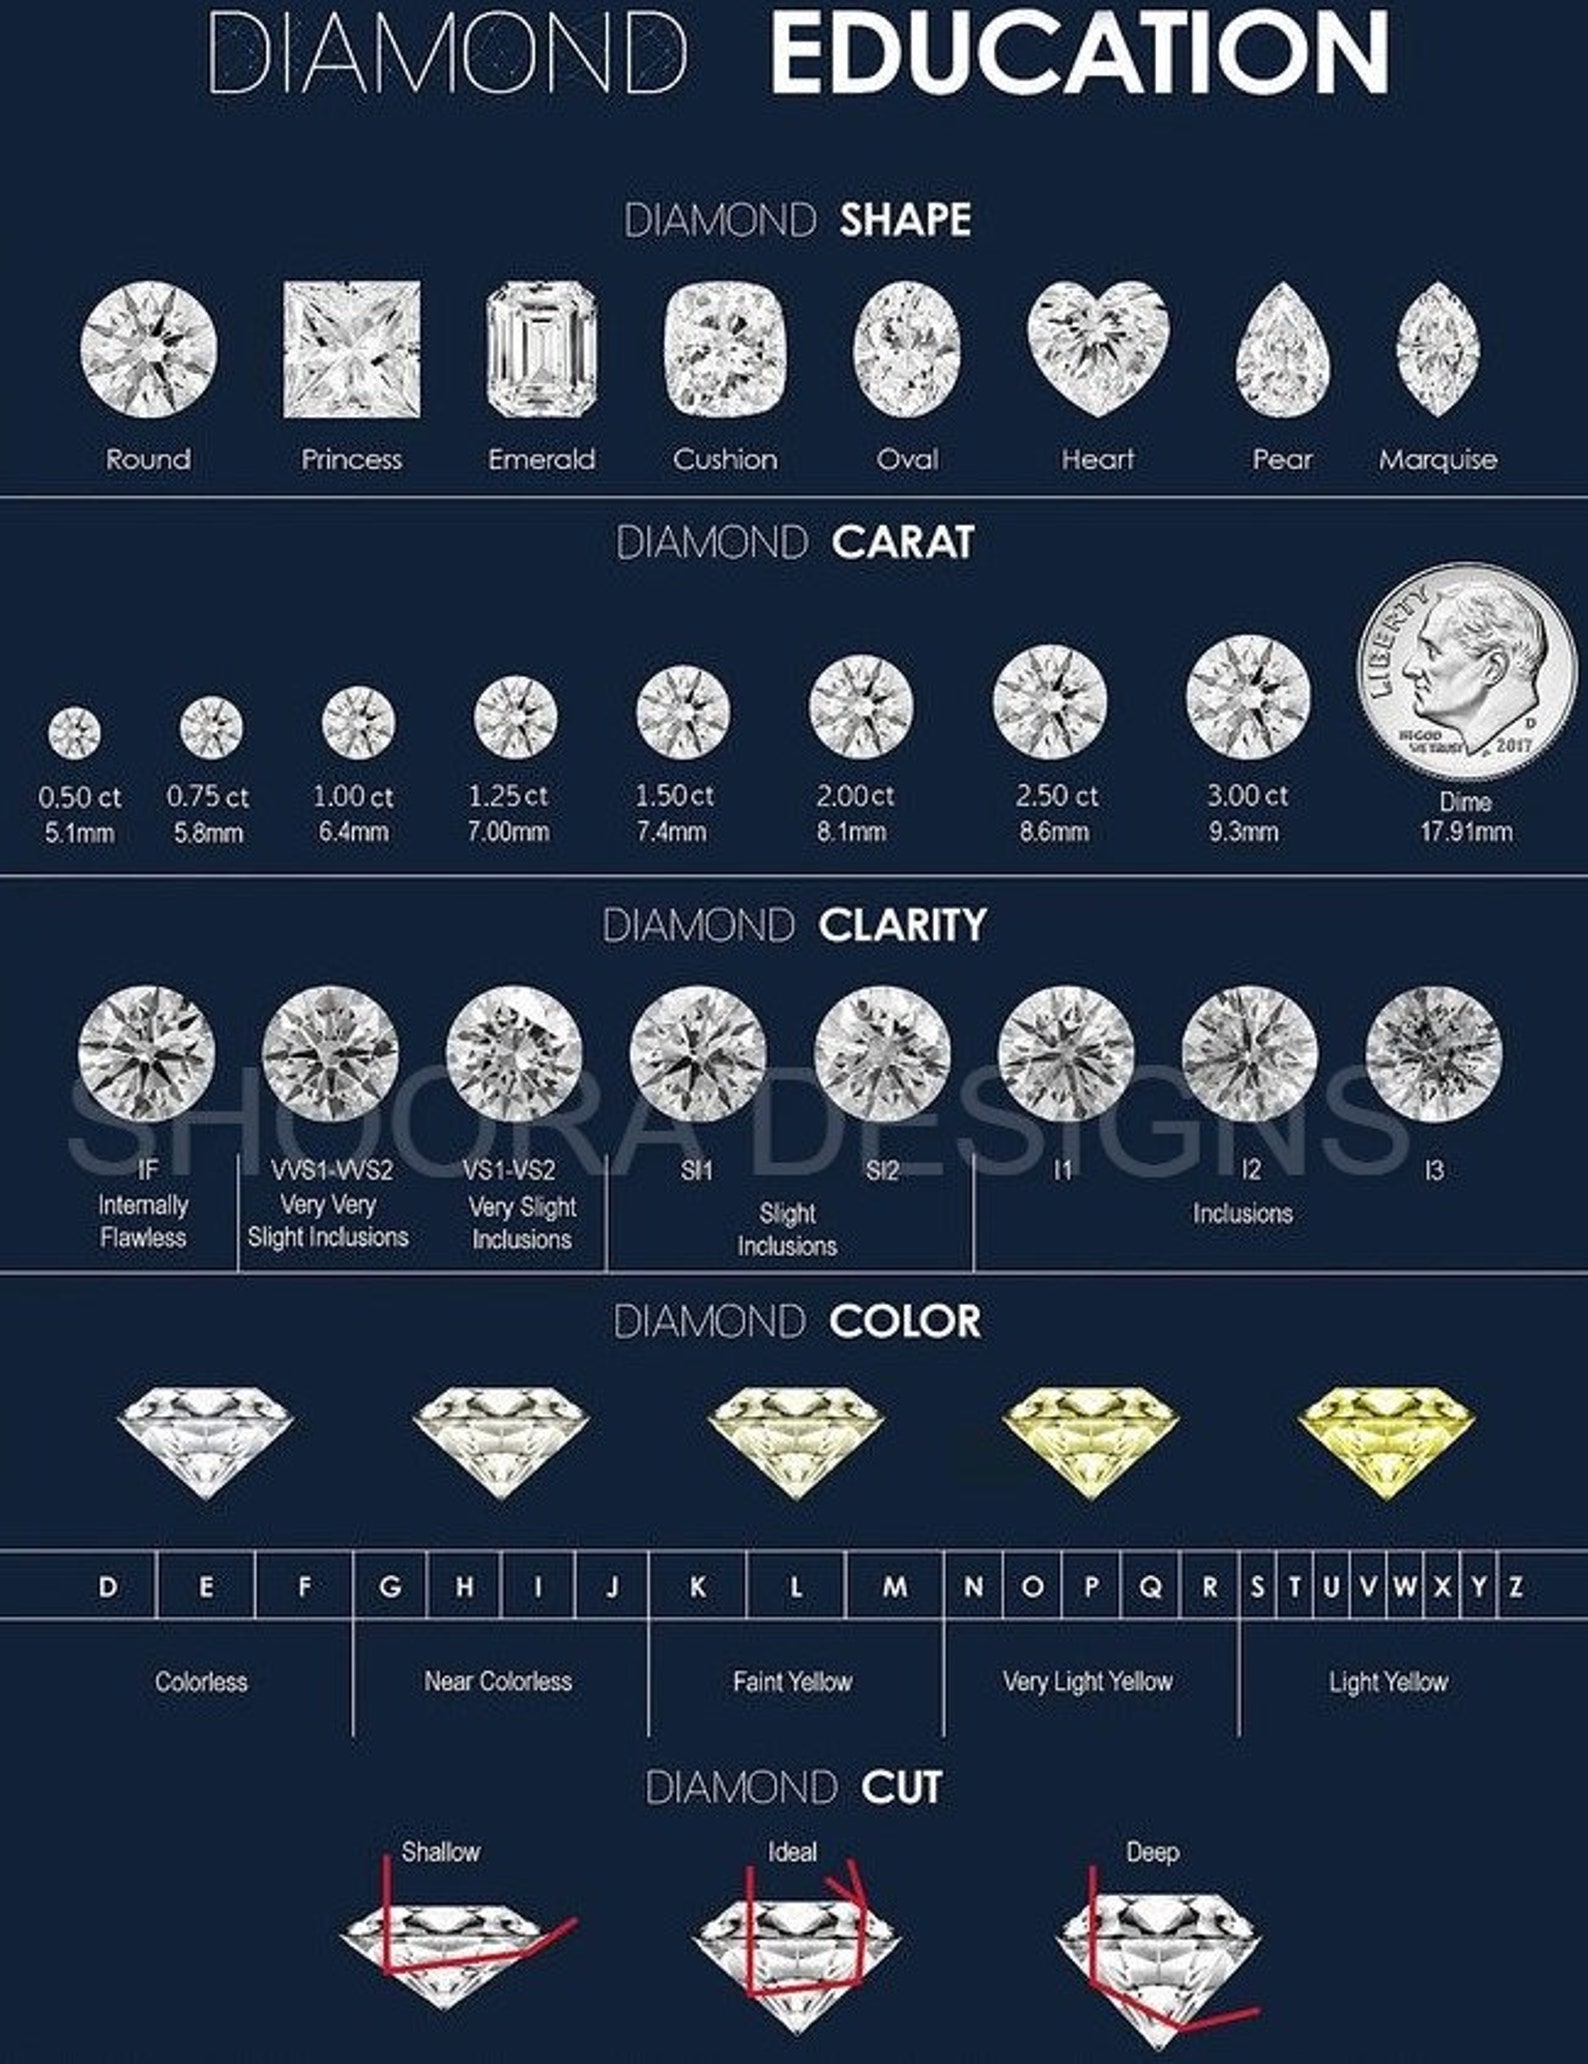 Diamond Education and Guide Image - Etsy